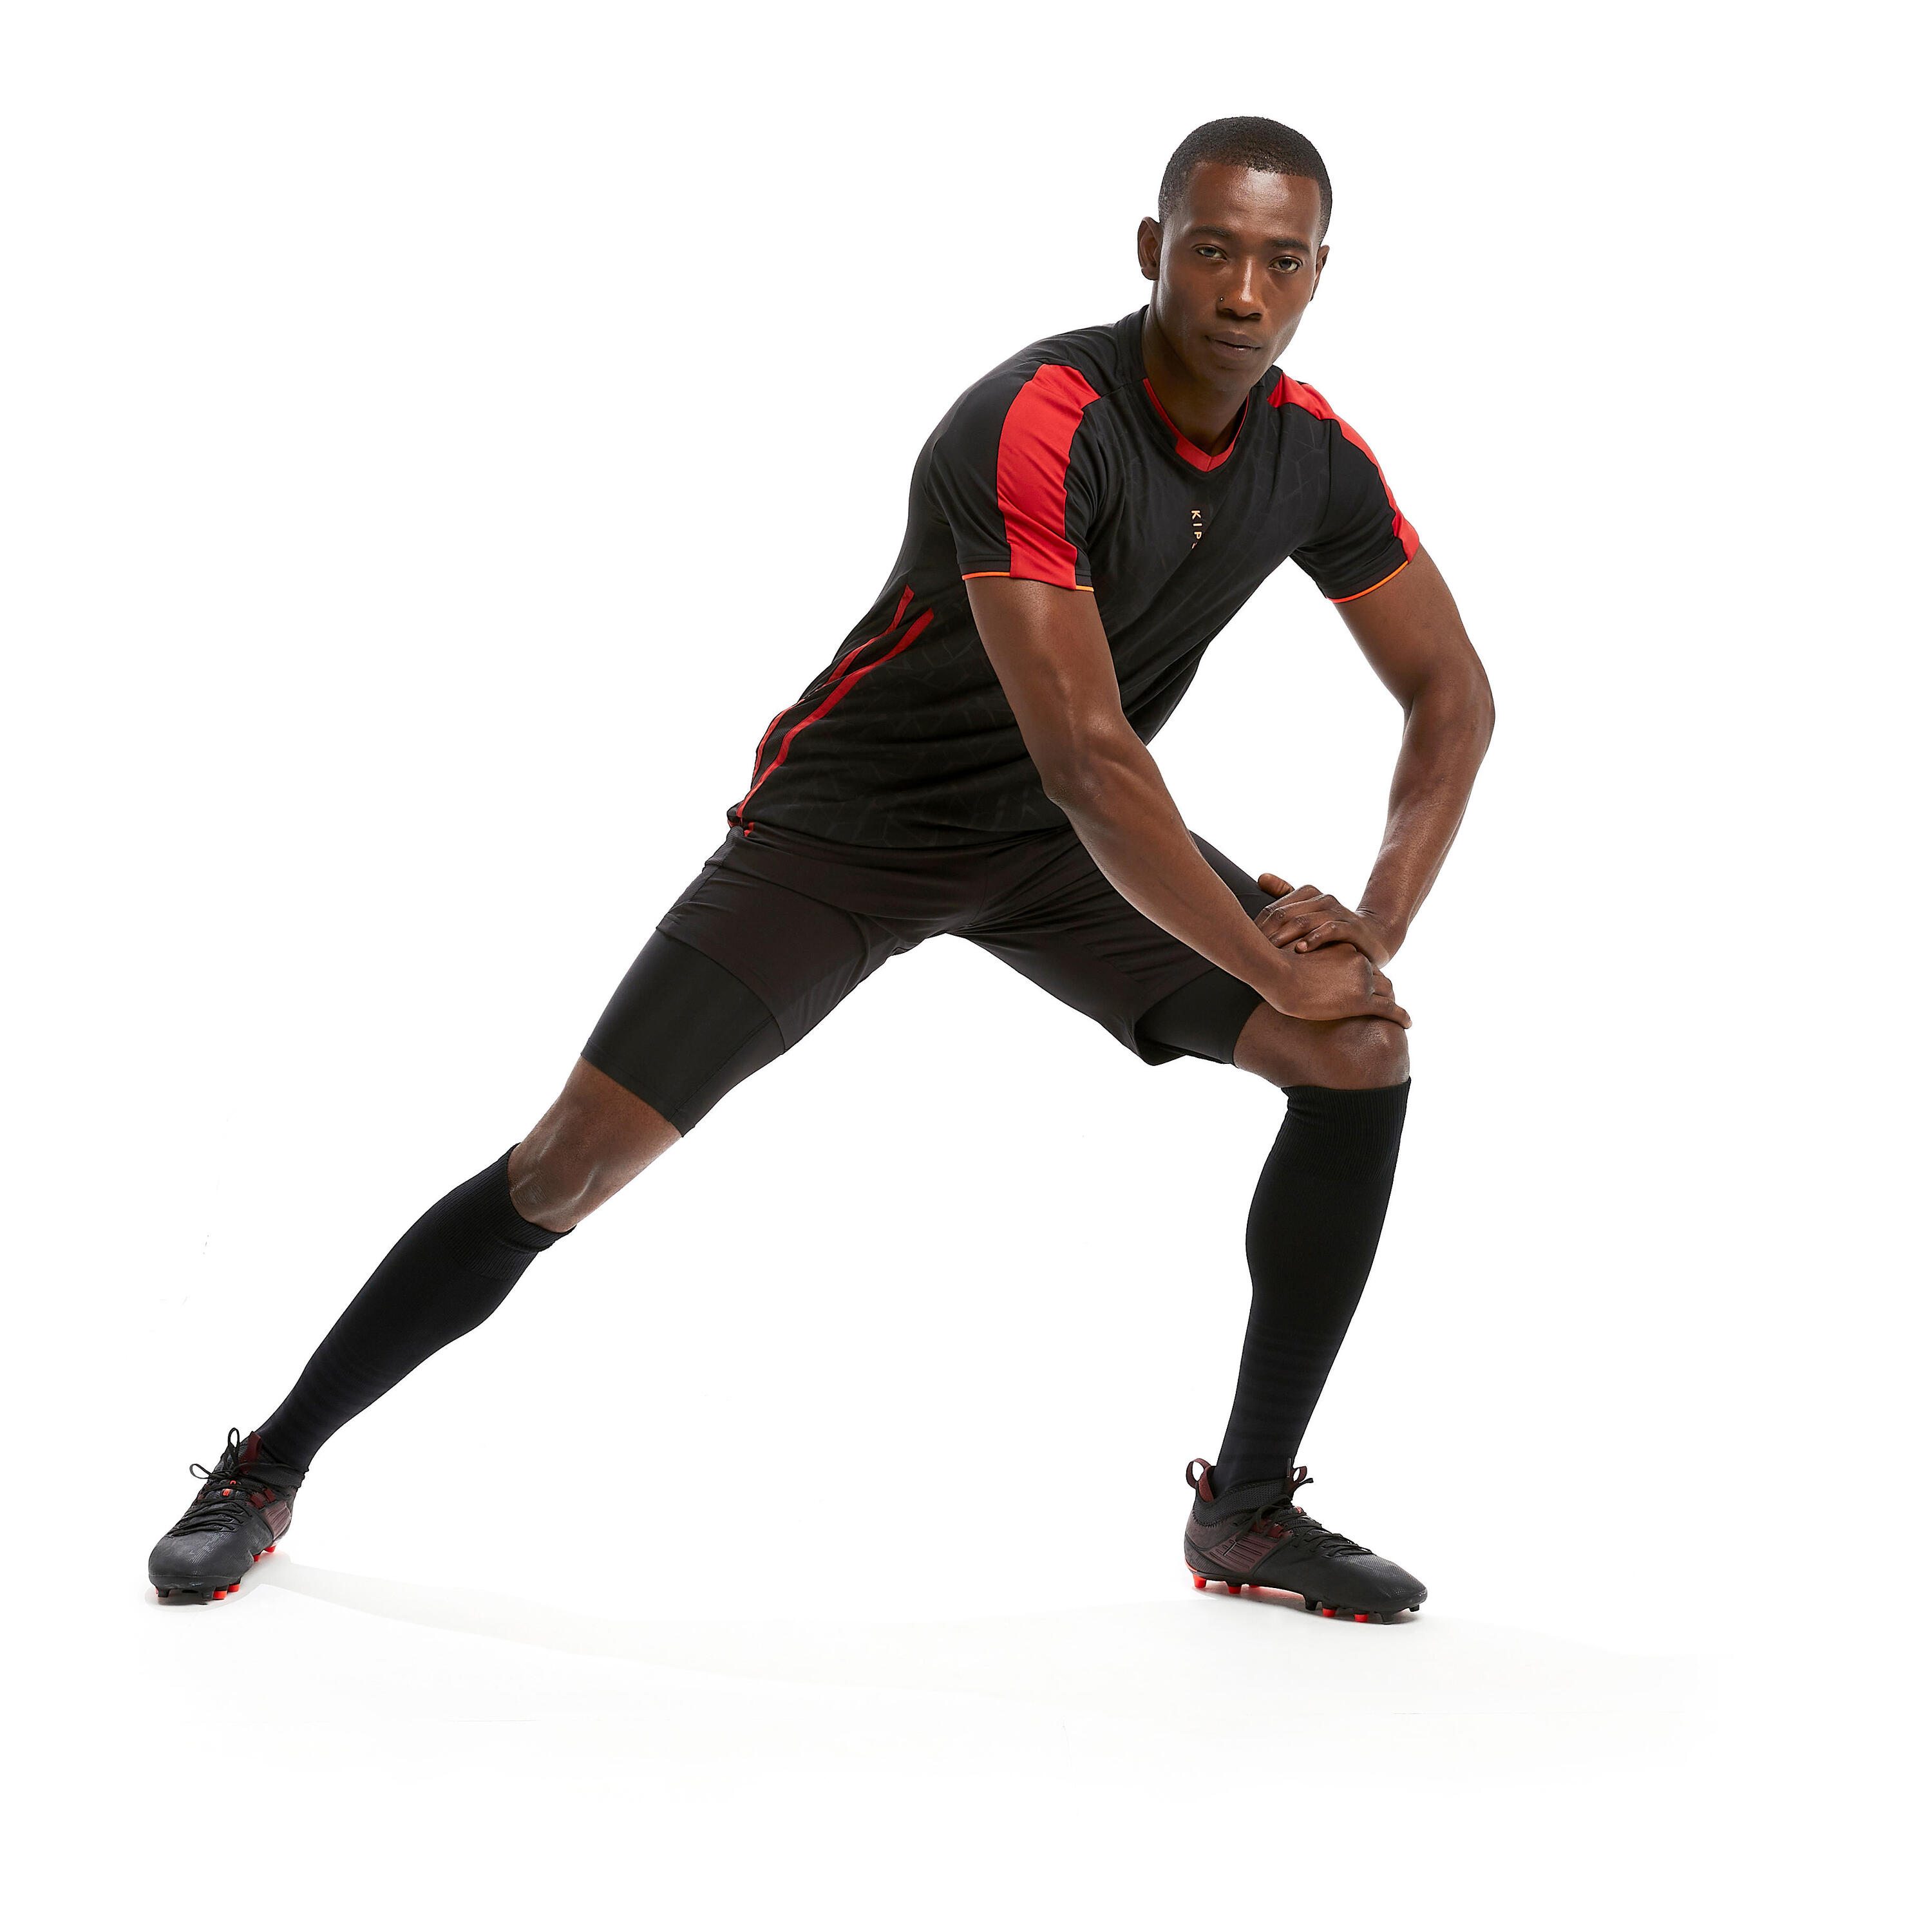 Adult 3-in-1 Football Shorts Traxium - Black/Red 9/9